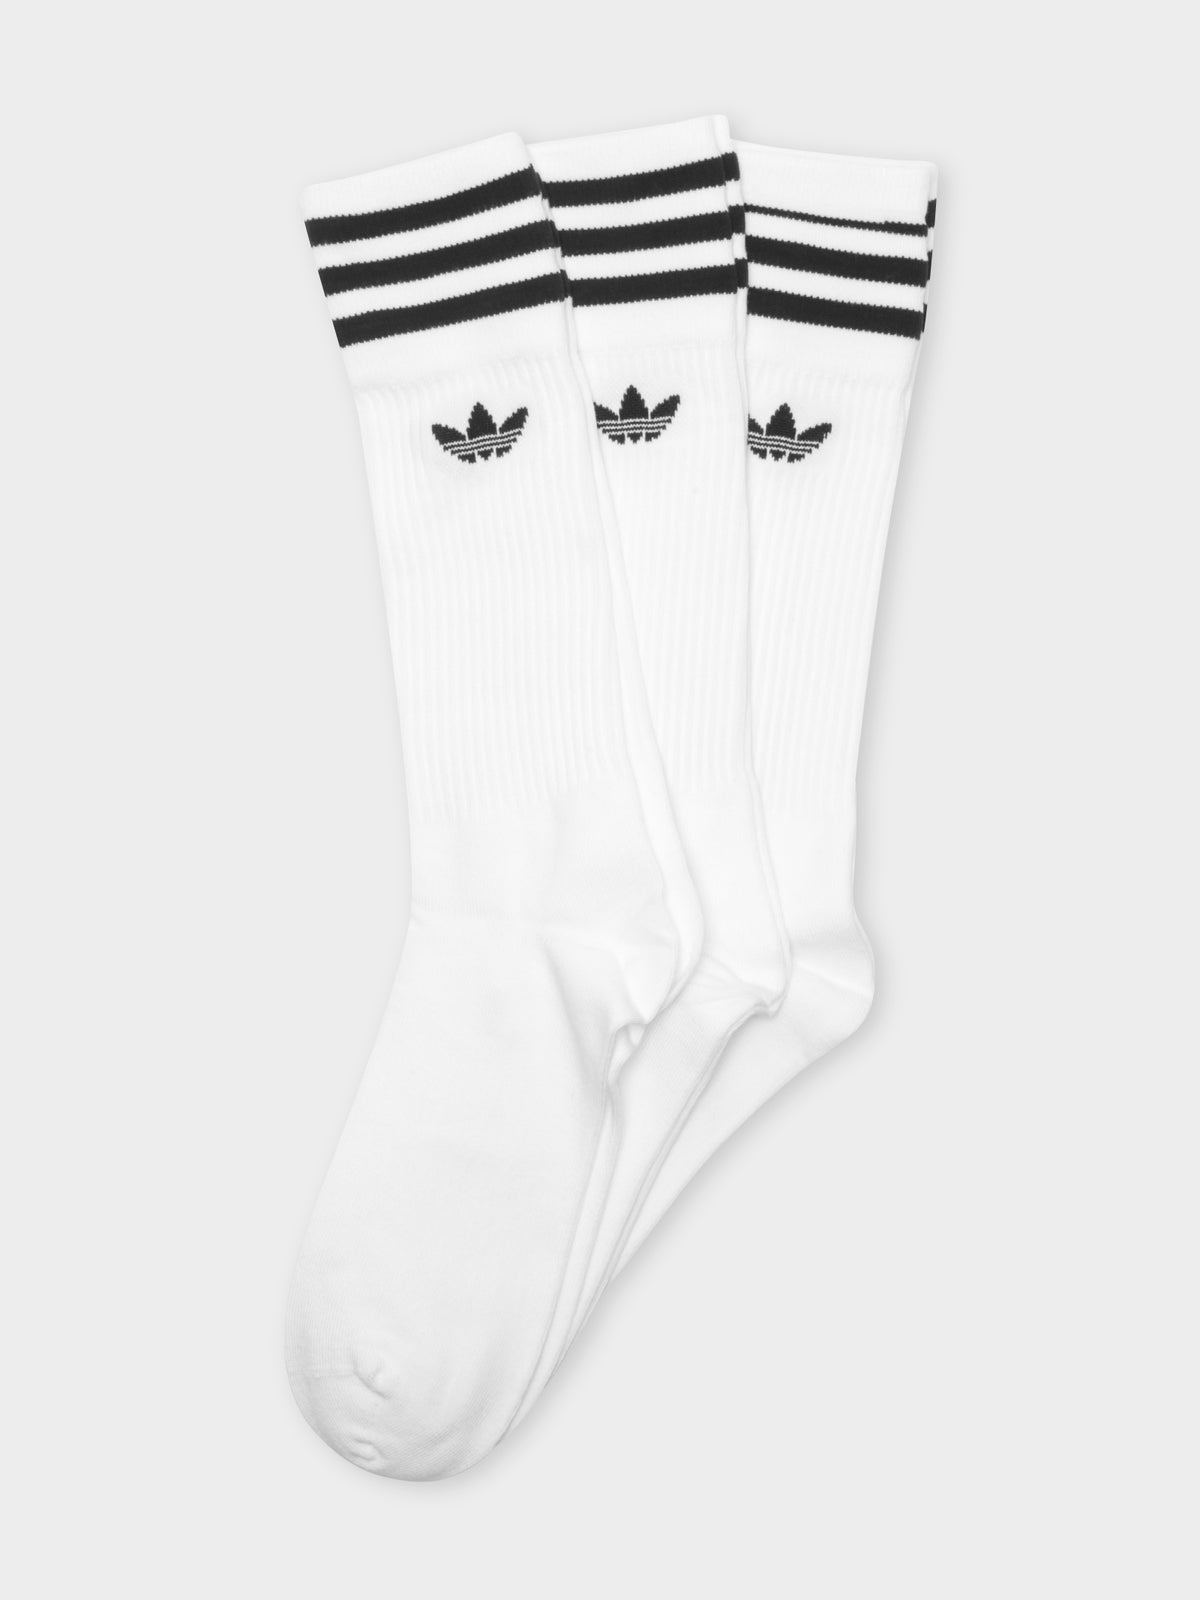 3 Pairs of Solid Crew Socks in White